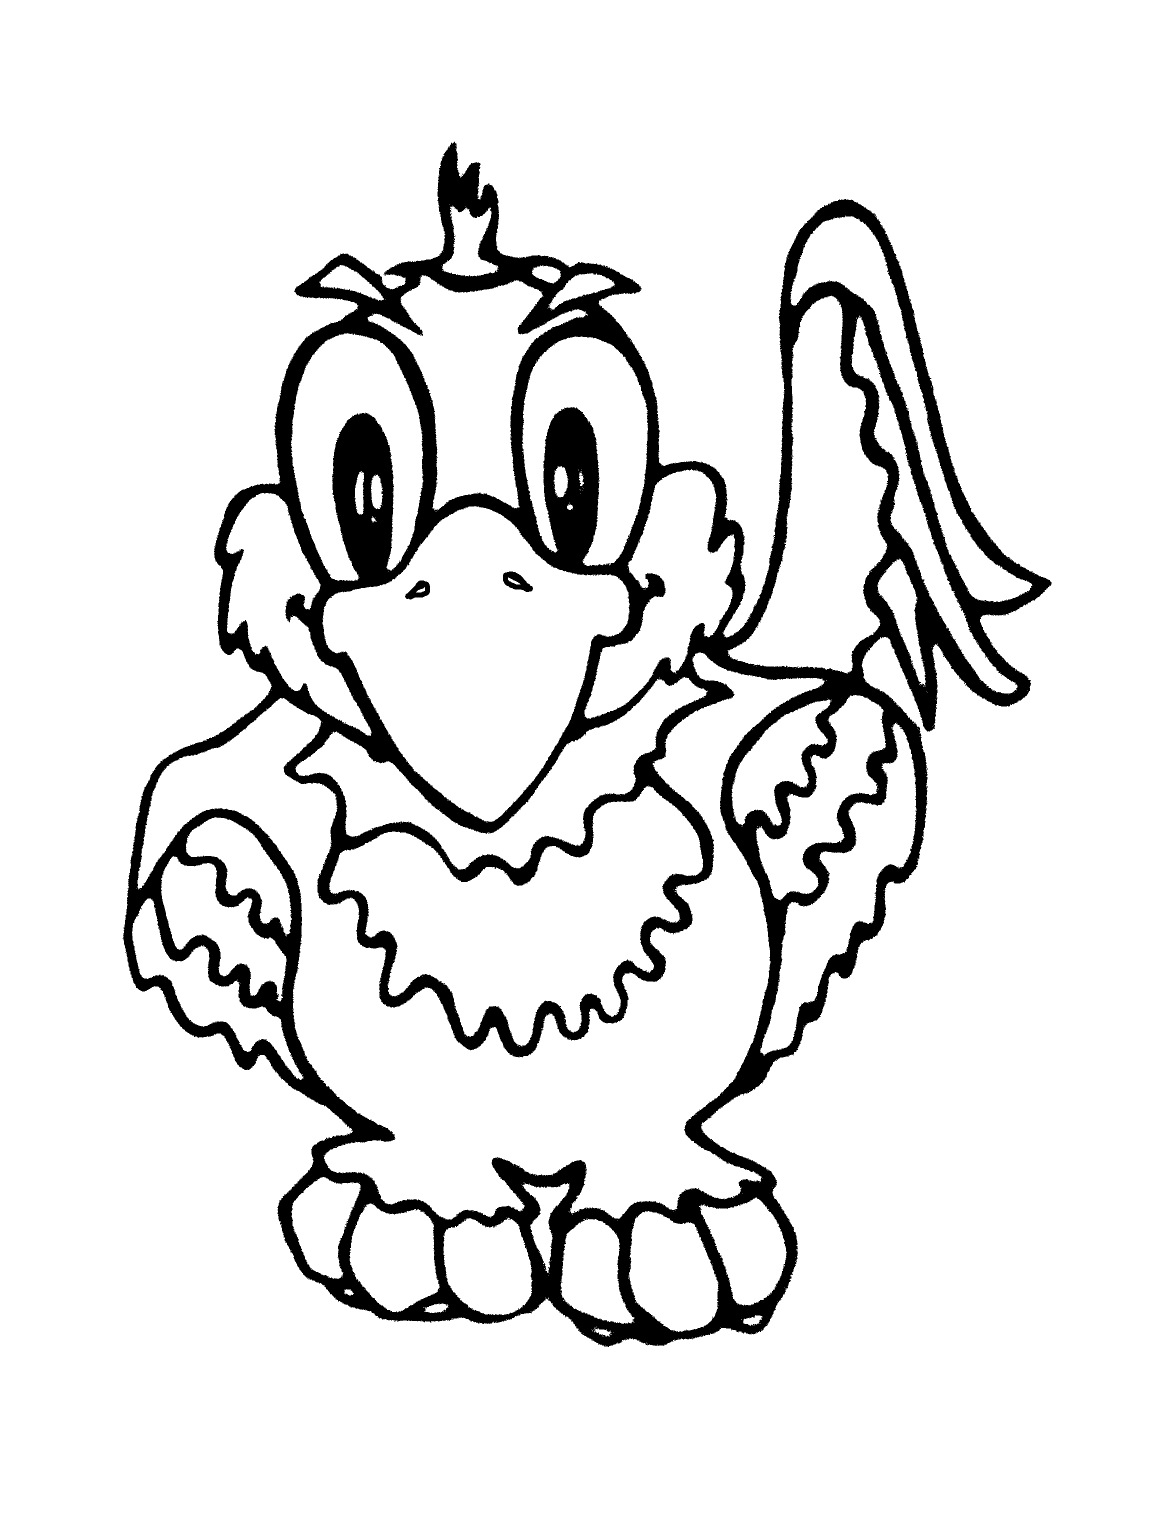 Corn Stalk Coloring Page - Viewing Gallery